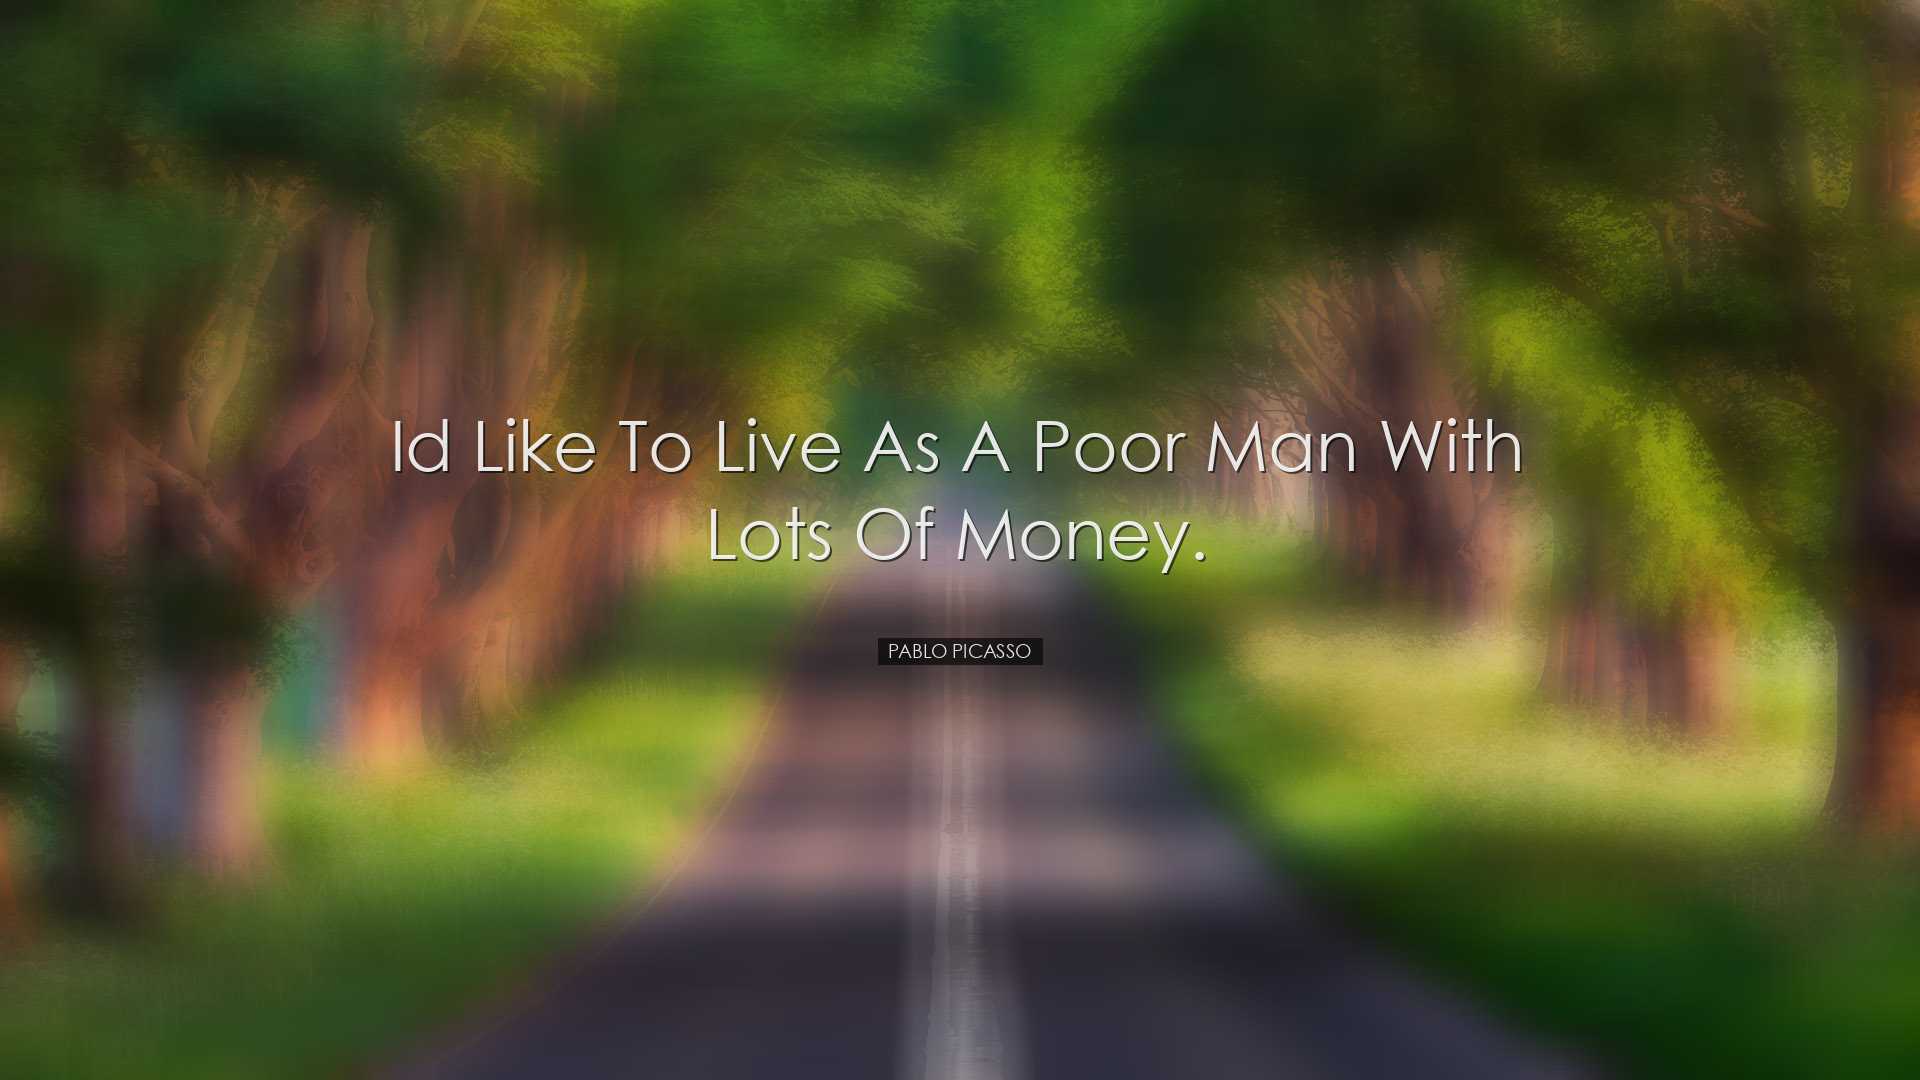 Id like to live as a poor man with lots of money. - Pablo Picasso